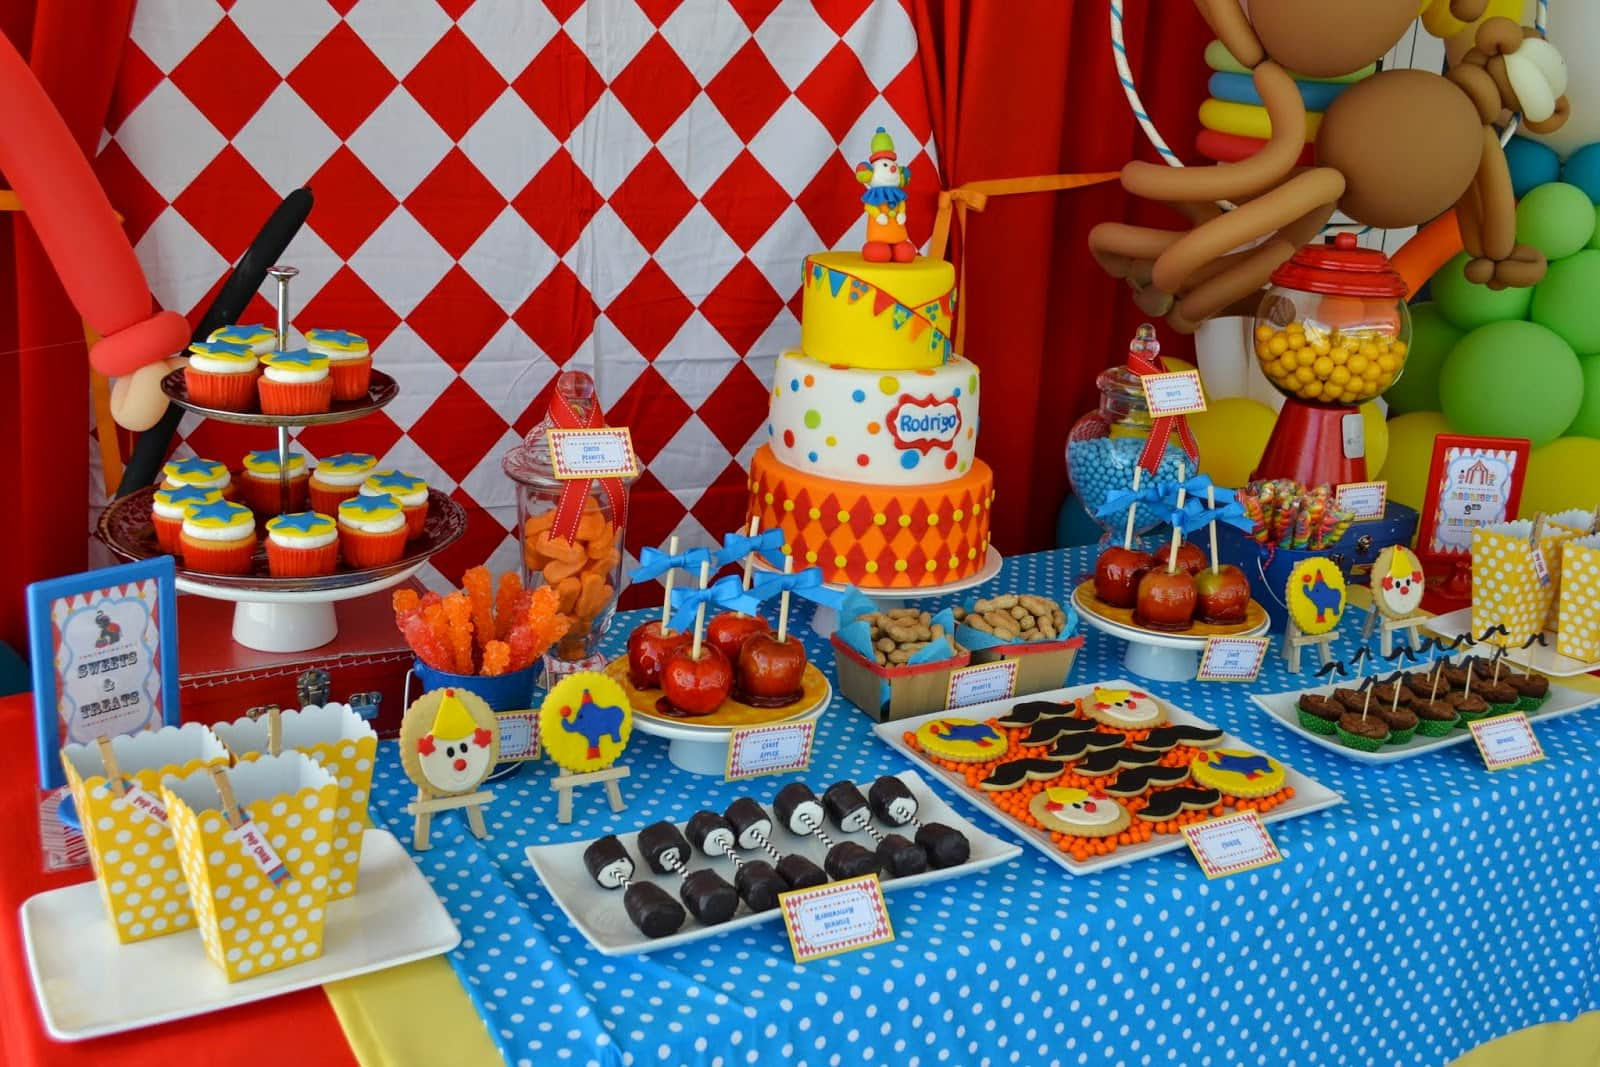 Birthday Decorations For Boy
 33 Awesome Birthday Party Ideas for Boys